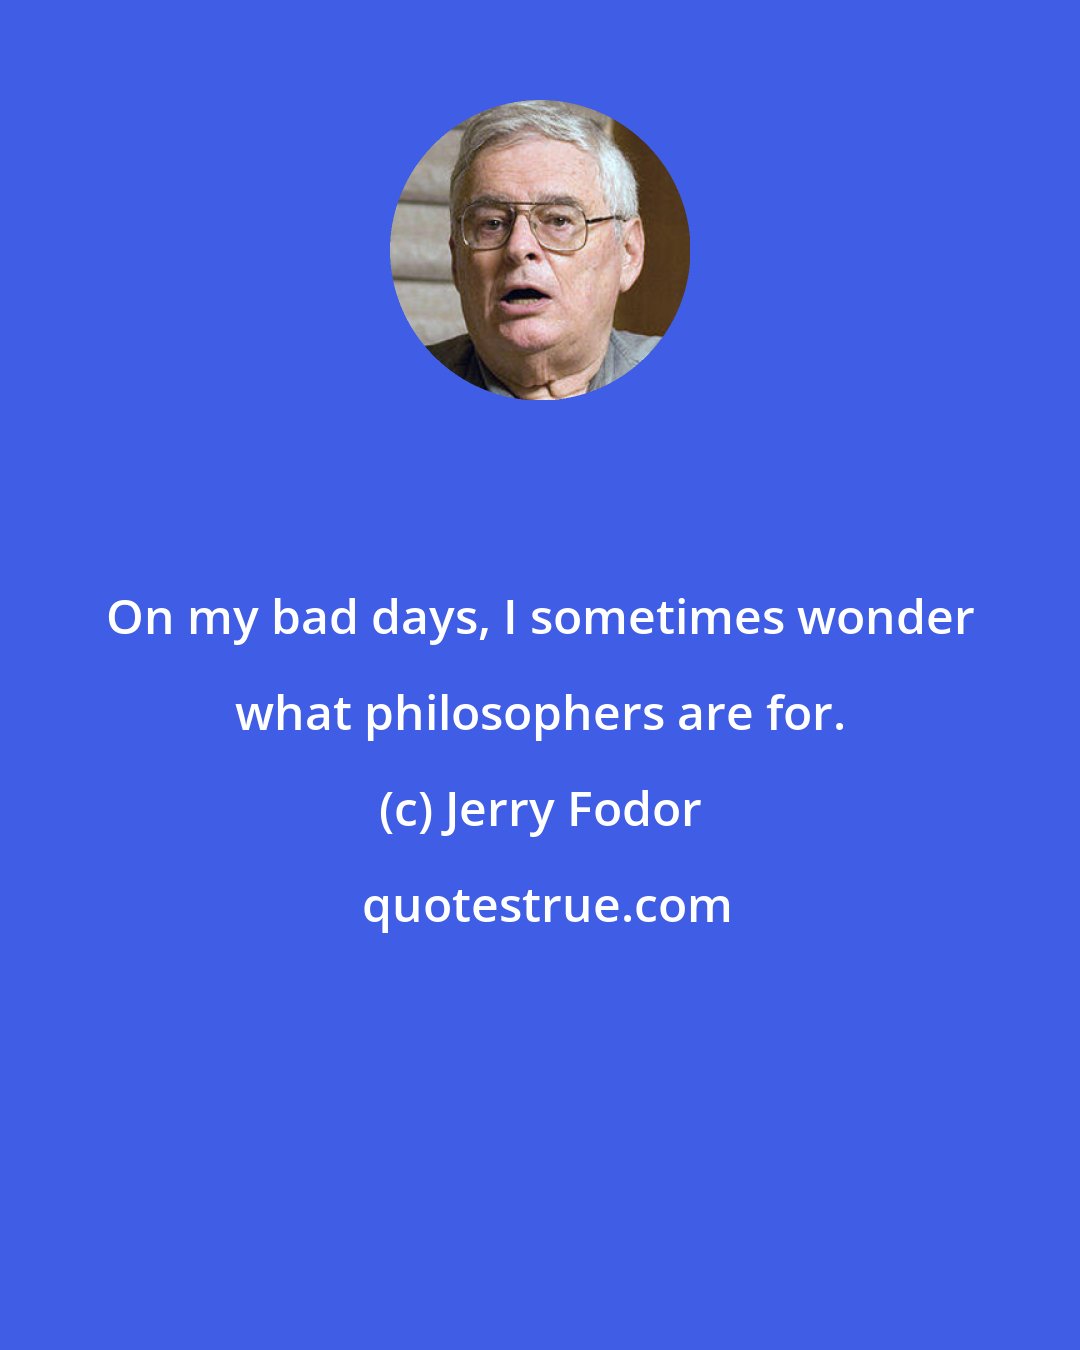 Jerry Fodor: On my bad days, I sometimes wonder what philosophers are for.